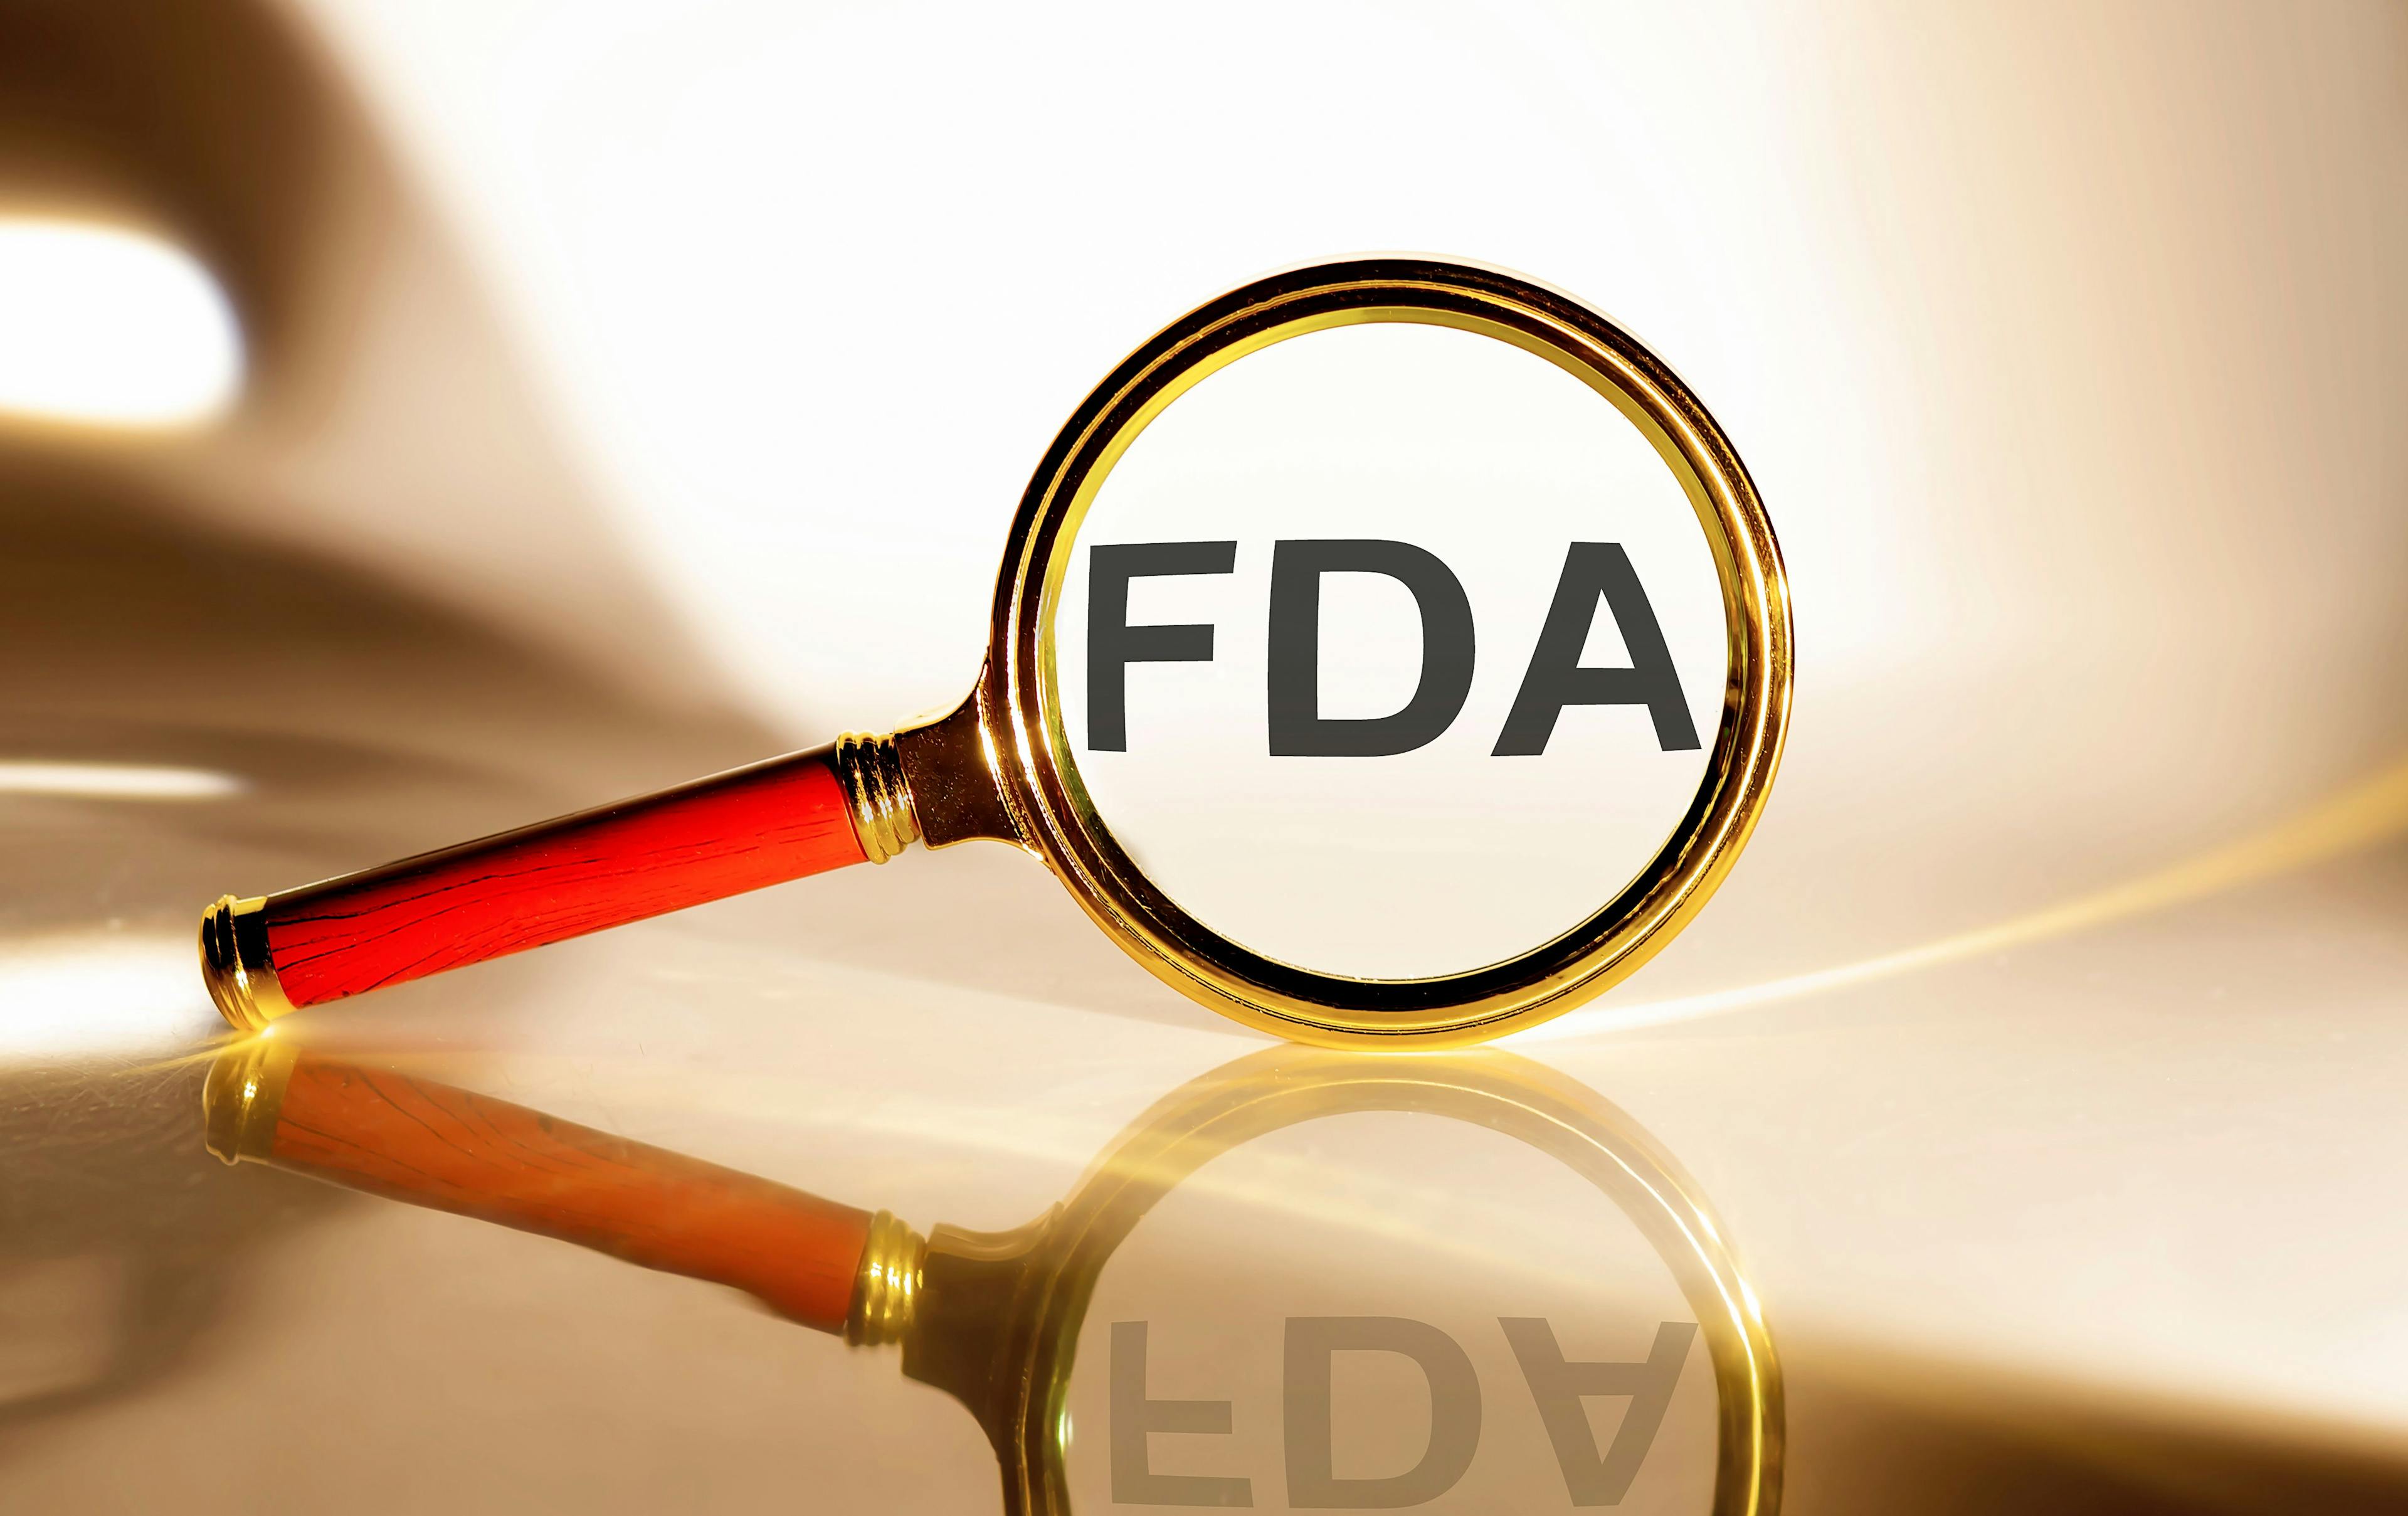 Ocuphire Pharma receives FDA approval of NDA, PDUFA date set for mydriasis treatment